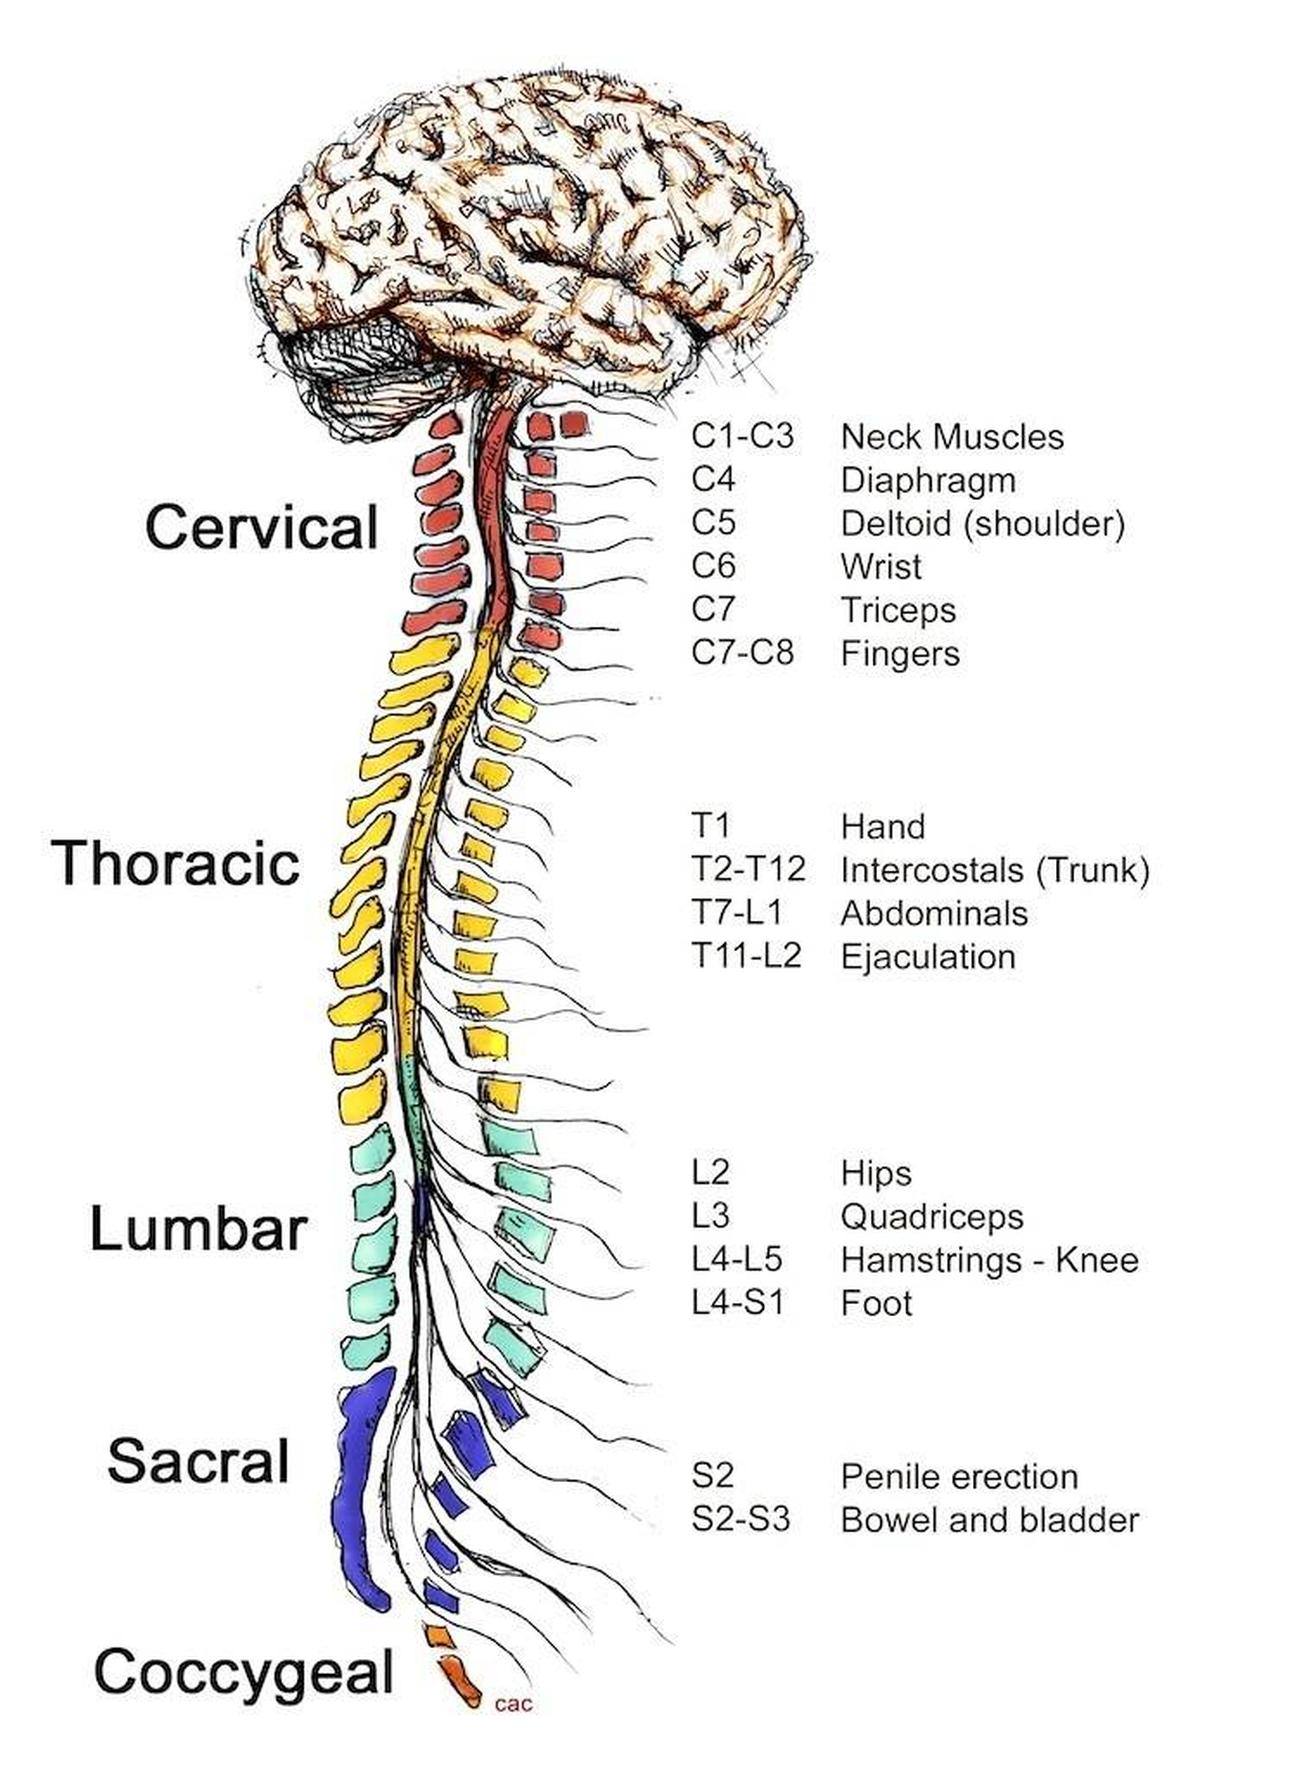 Pictures Of Central Nervous System